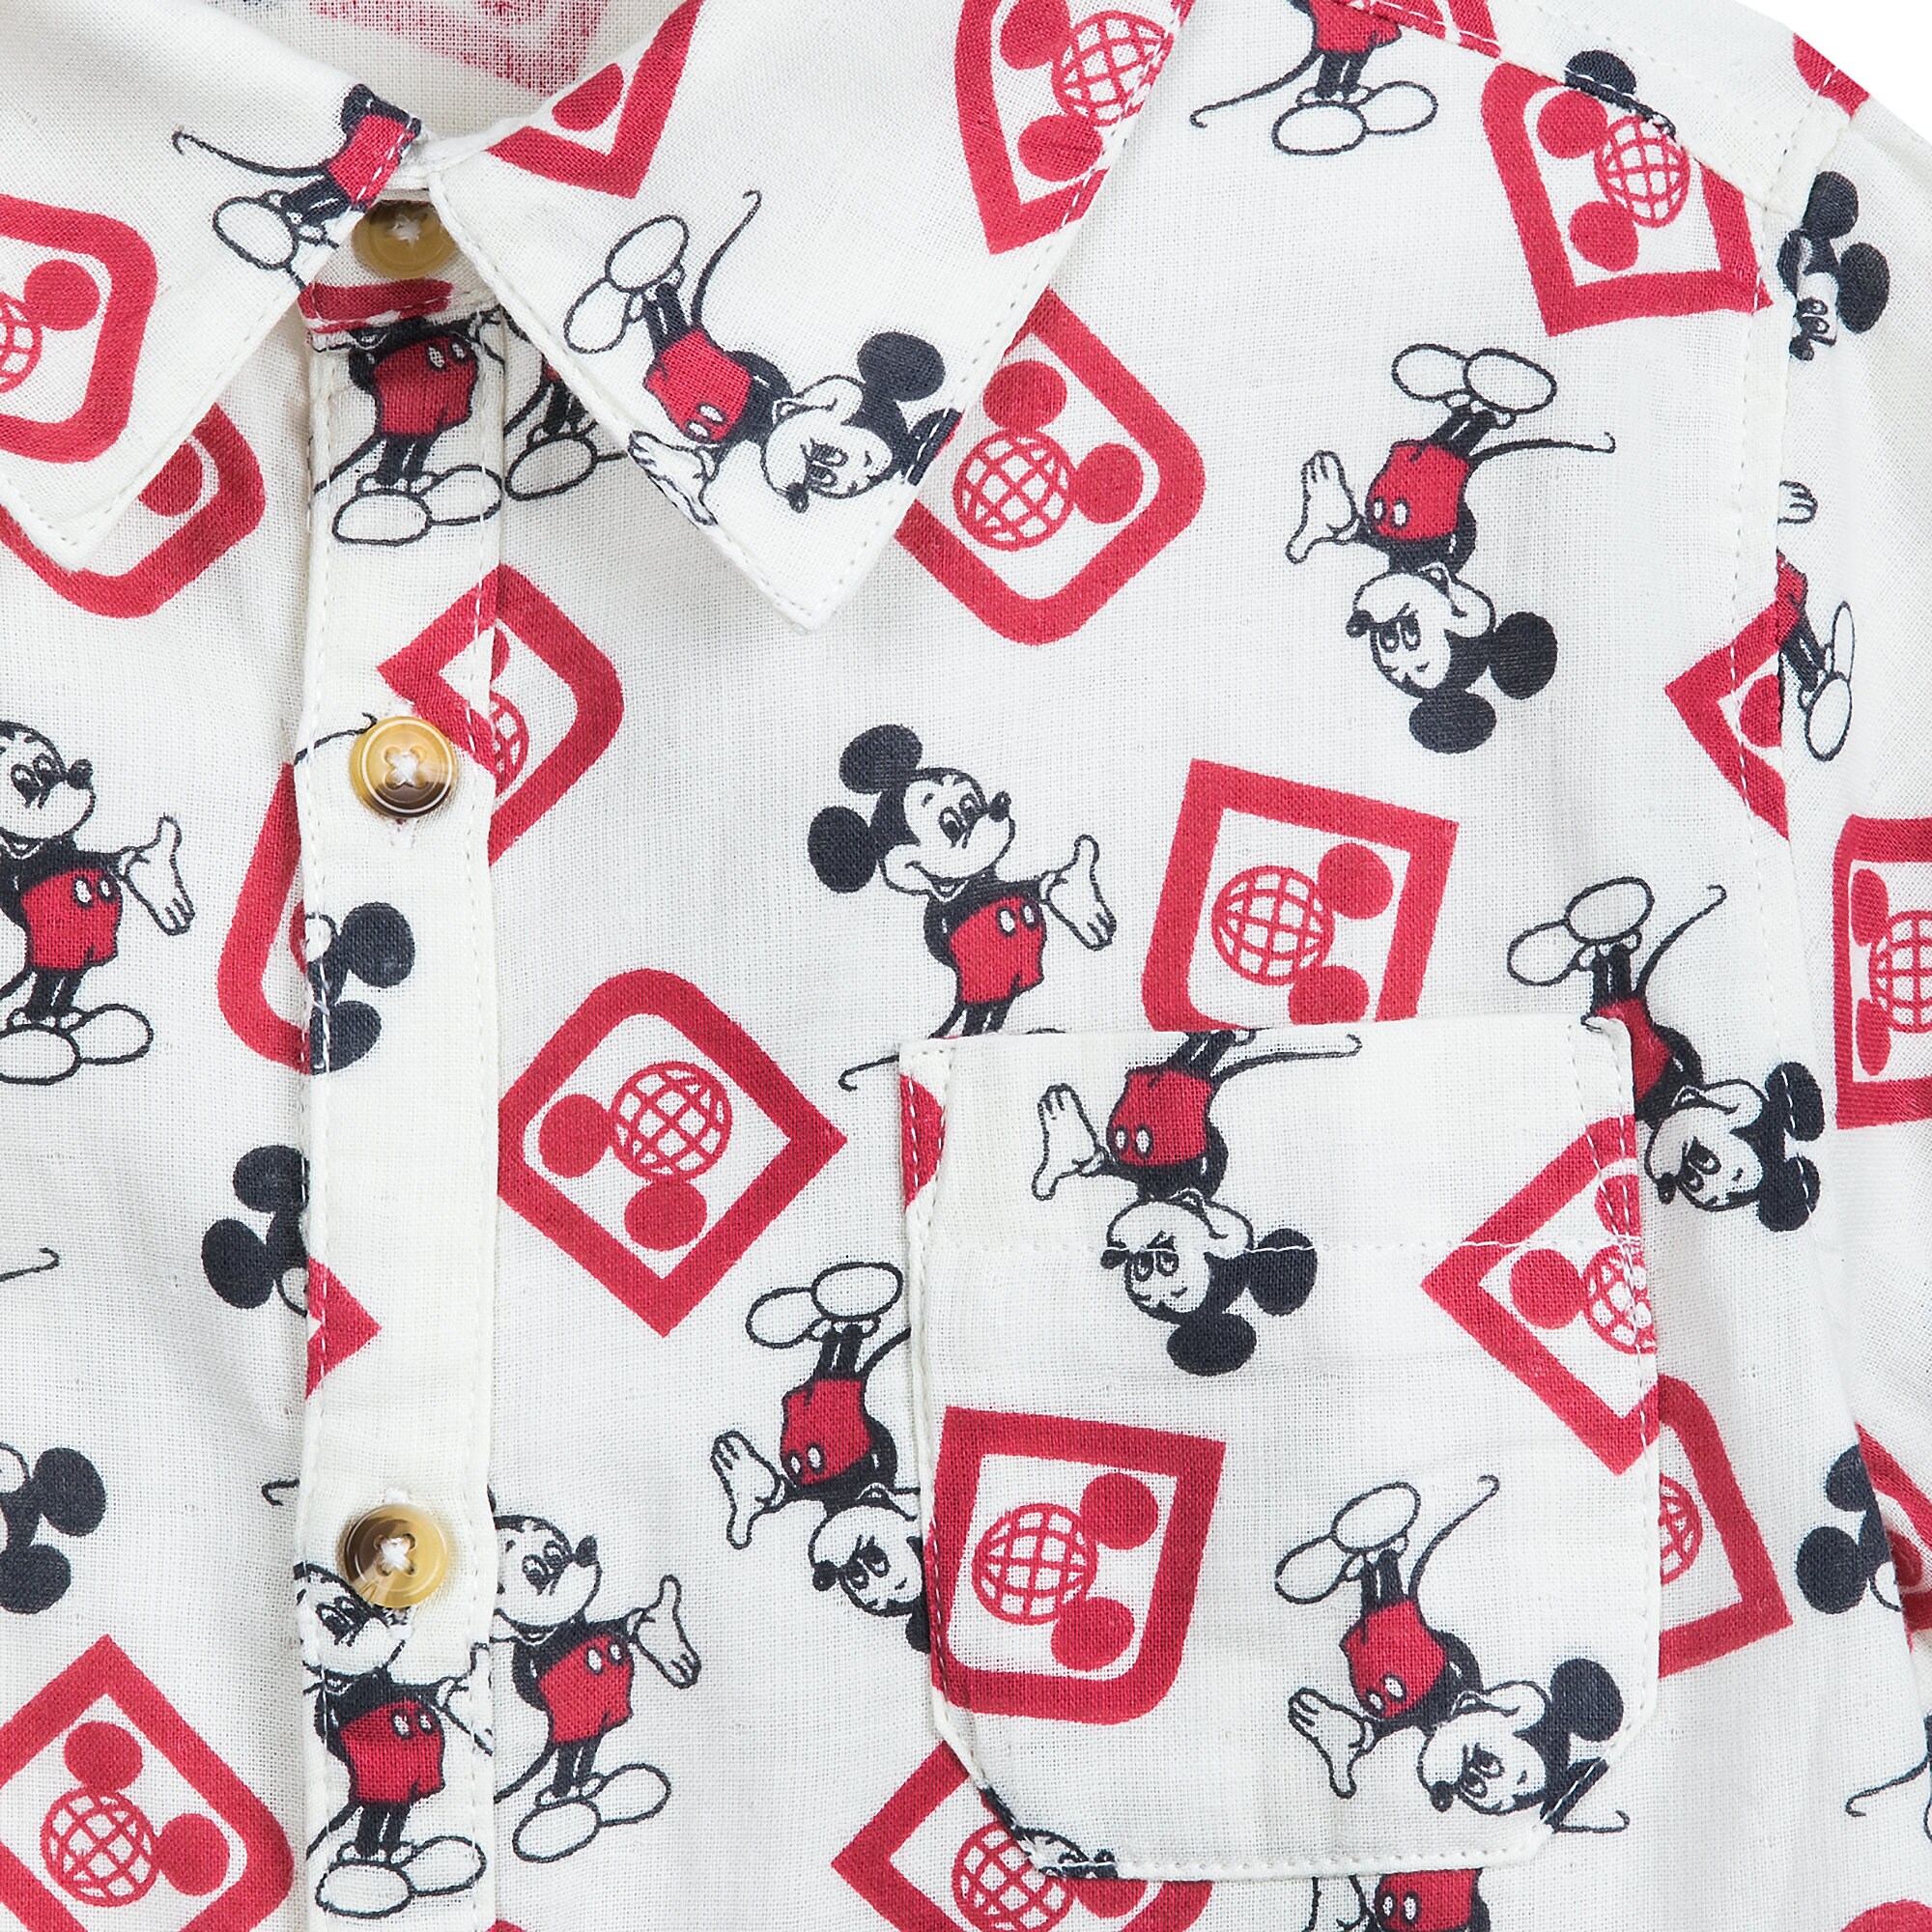 Mickey Mouse Woven Shirt for Kids by Junk Food - Walt Disney World